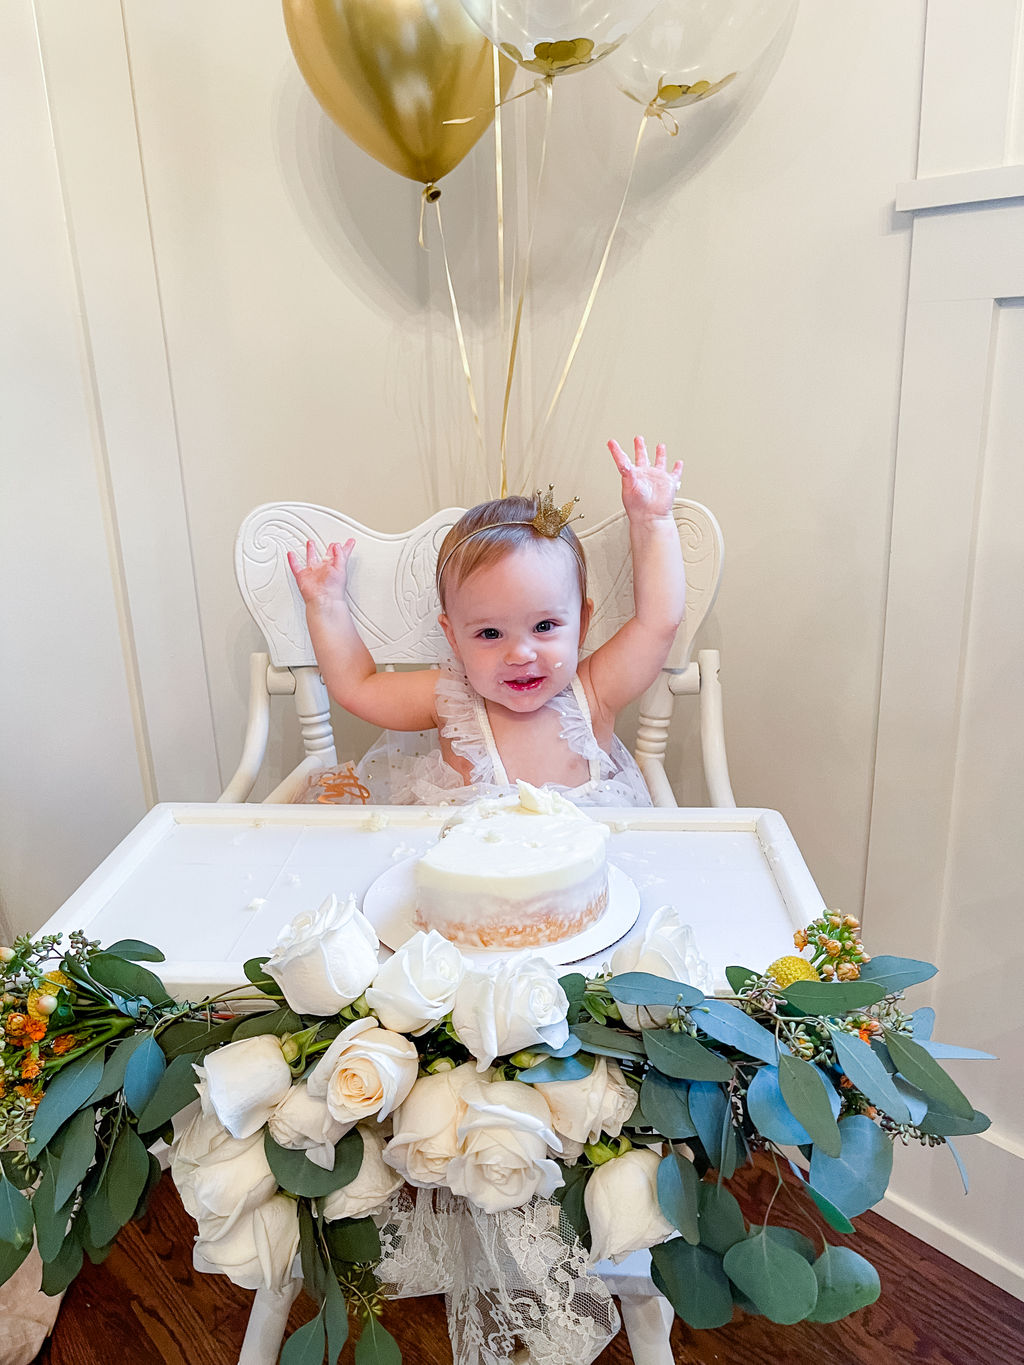 Olivia 1 Year Old - Rebecca Musayev Photography is a legacy wedding photographer serving the Nashville Tennessee area and destination locations.